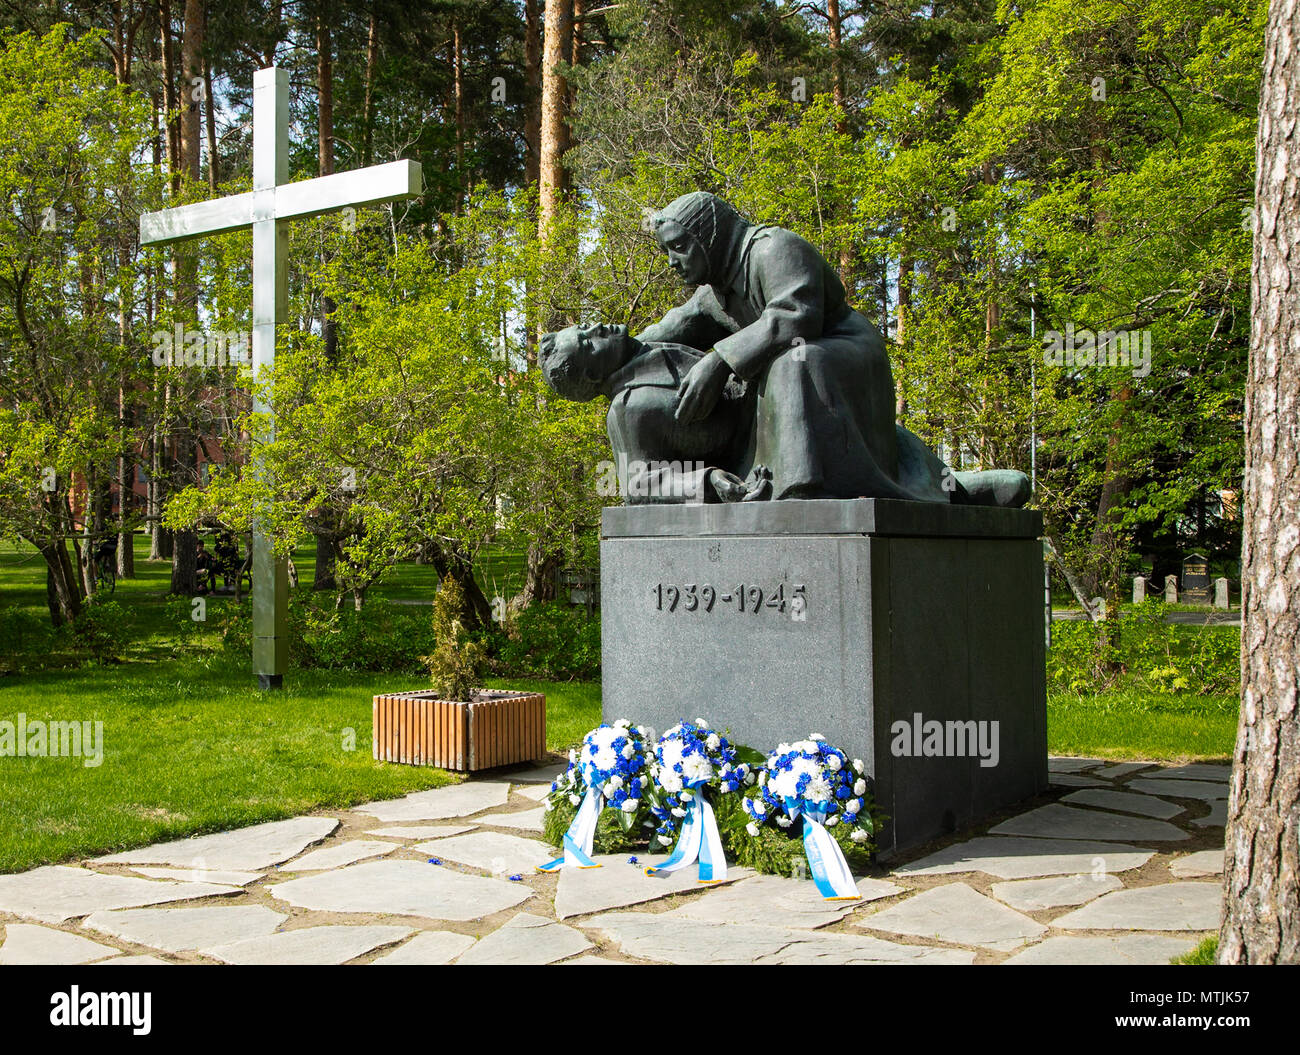 The monument of the fallen in Finland's wars at the cemetery of Kuopio, with wreaths of the Memorial Day placed in front of the sculpture. Stock Photo